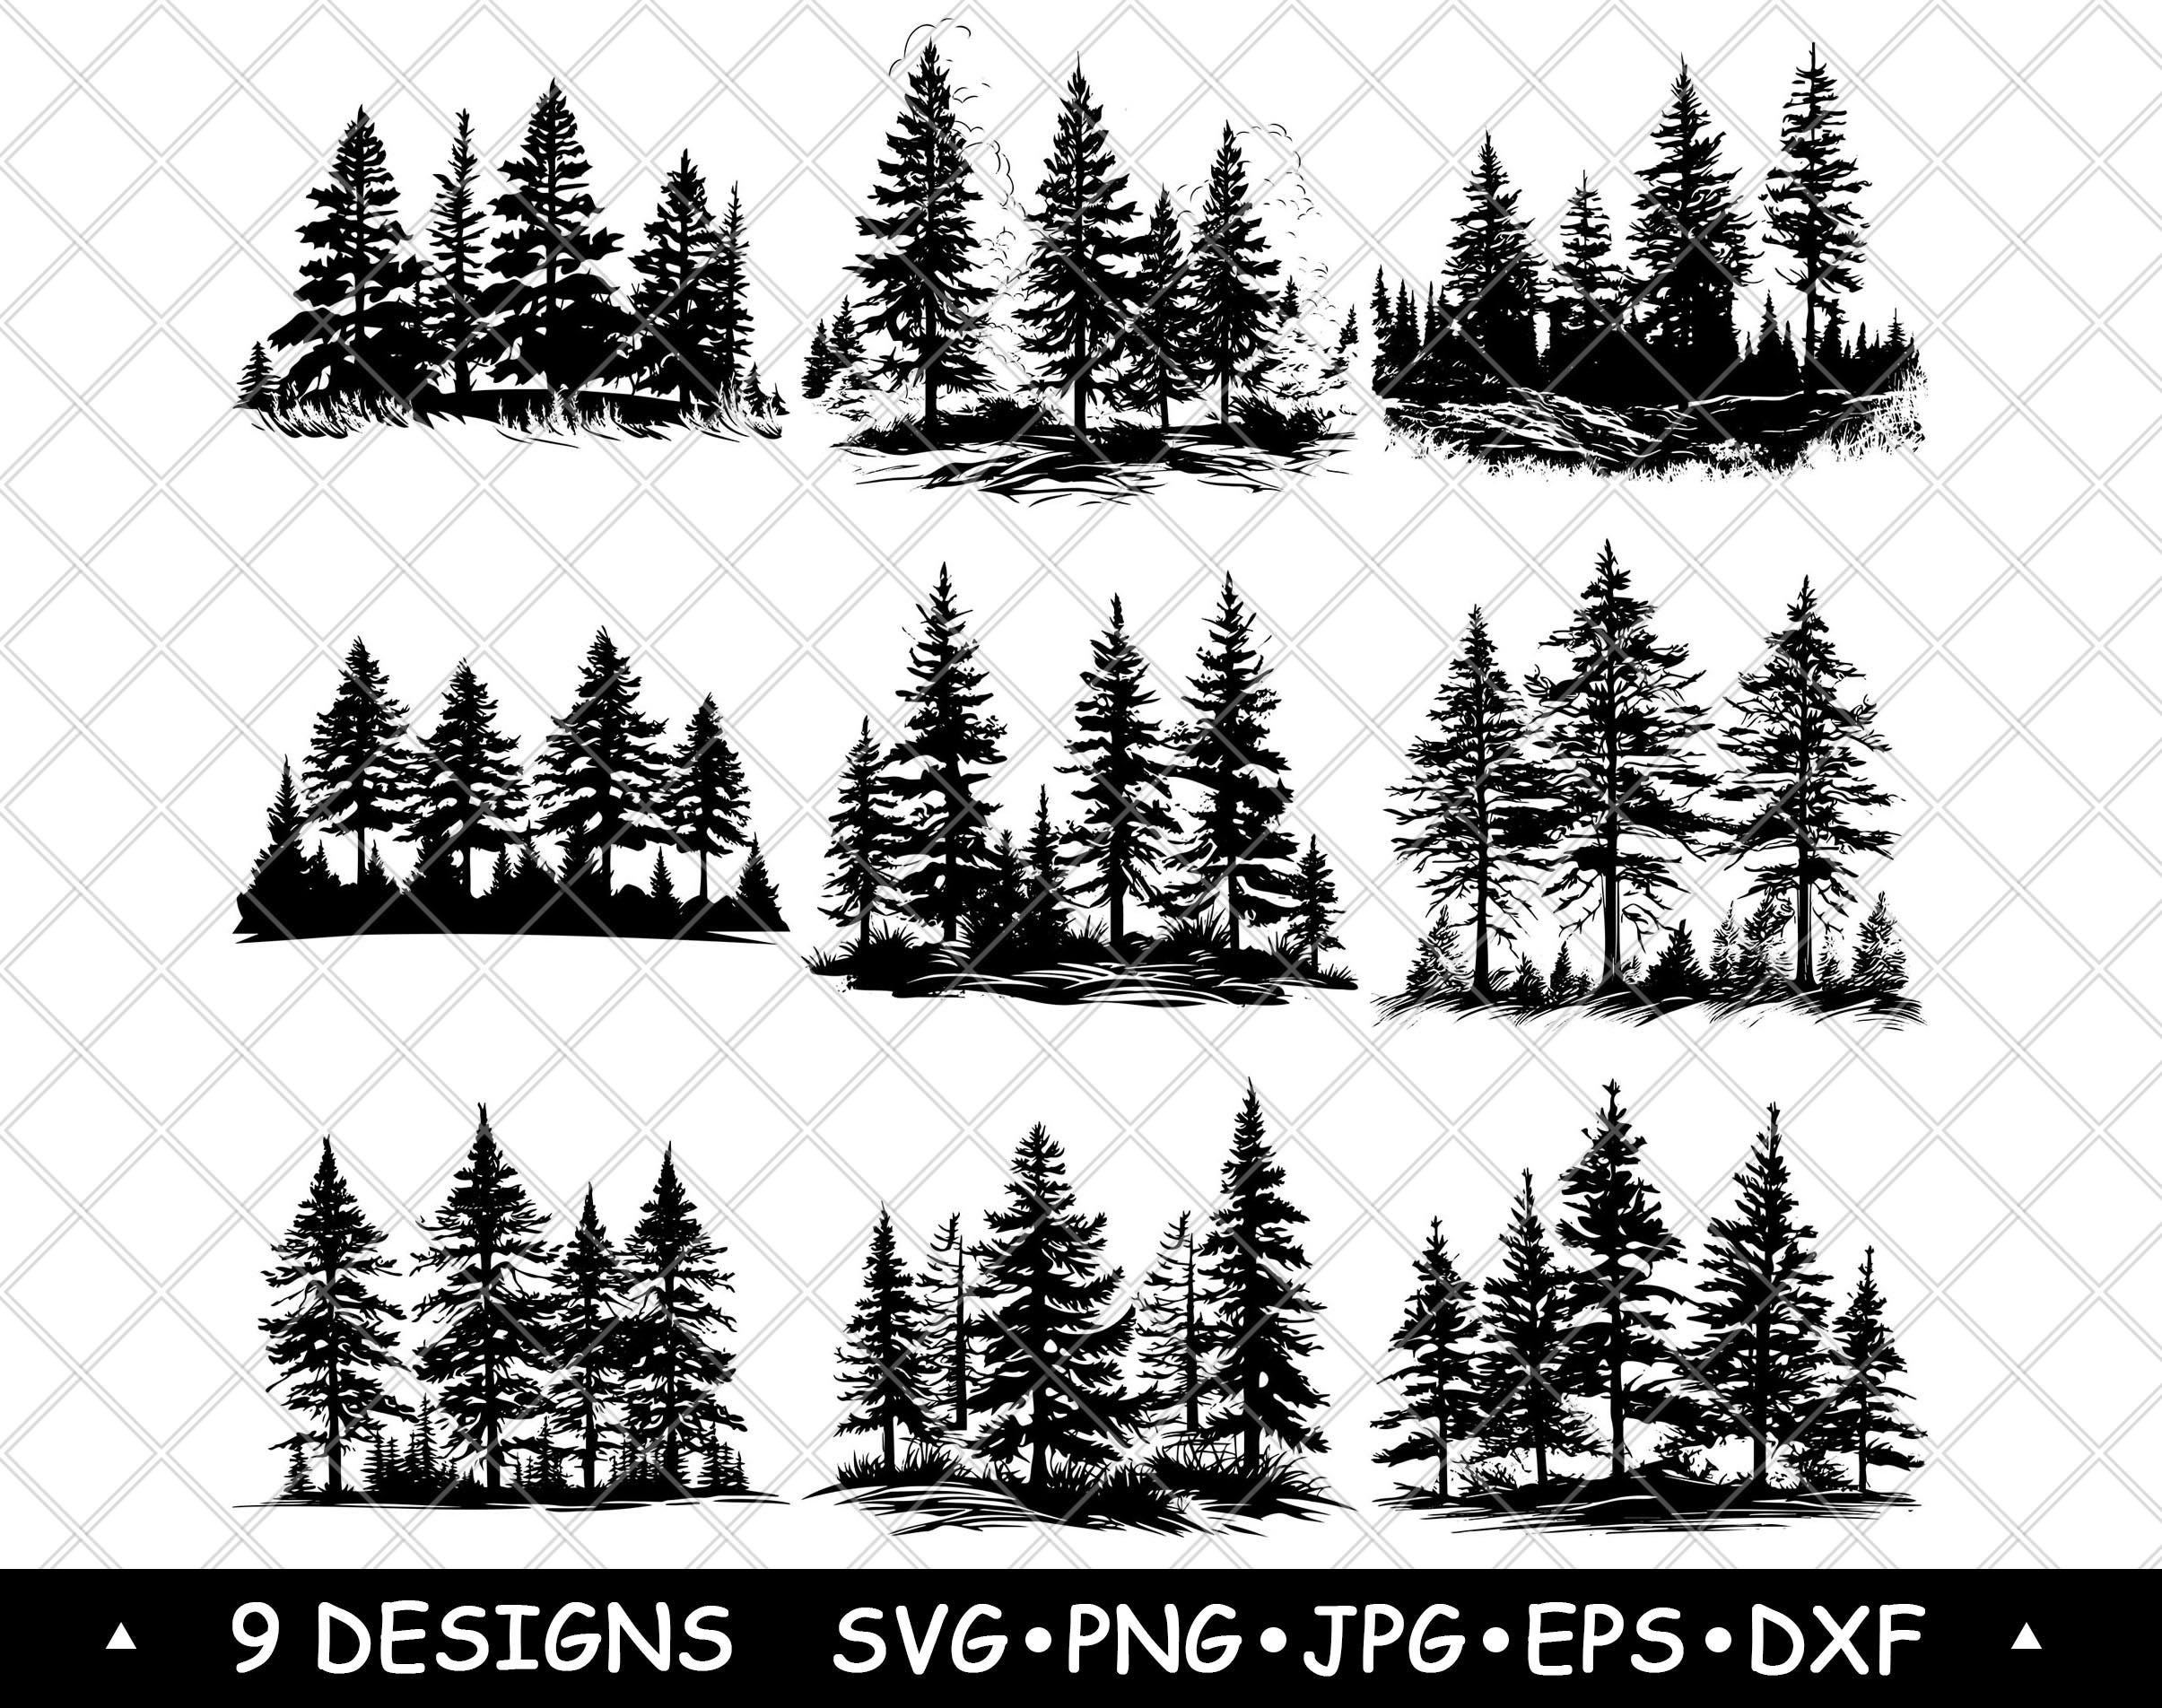 Pine Trees Evergreen Forest Coniferous Christmas Cones PNG,SVG,EPS,Cricut,Silhouette,Cut,Engrave,Stencil,Sticker,Decal,Vector,Clipart,Print